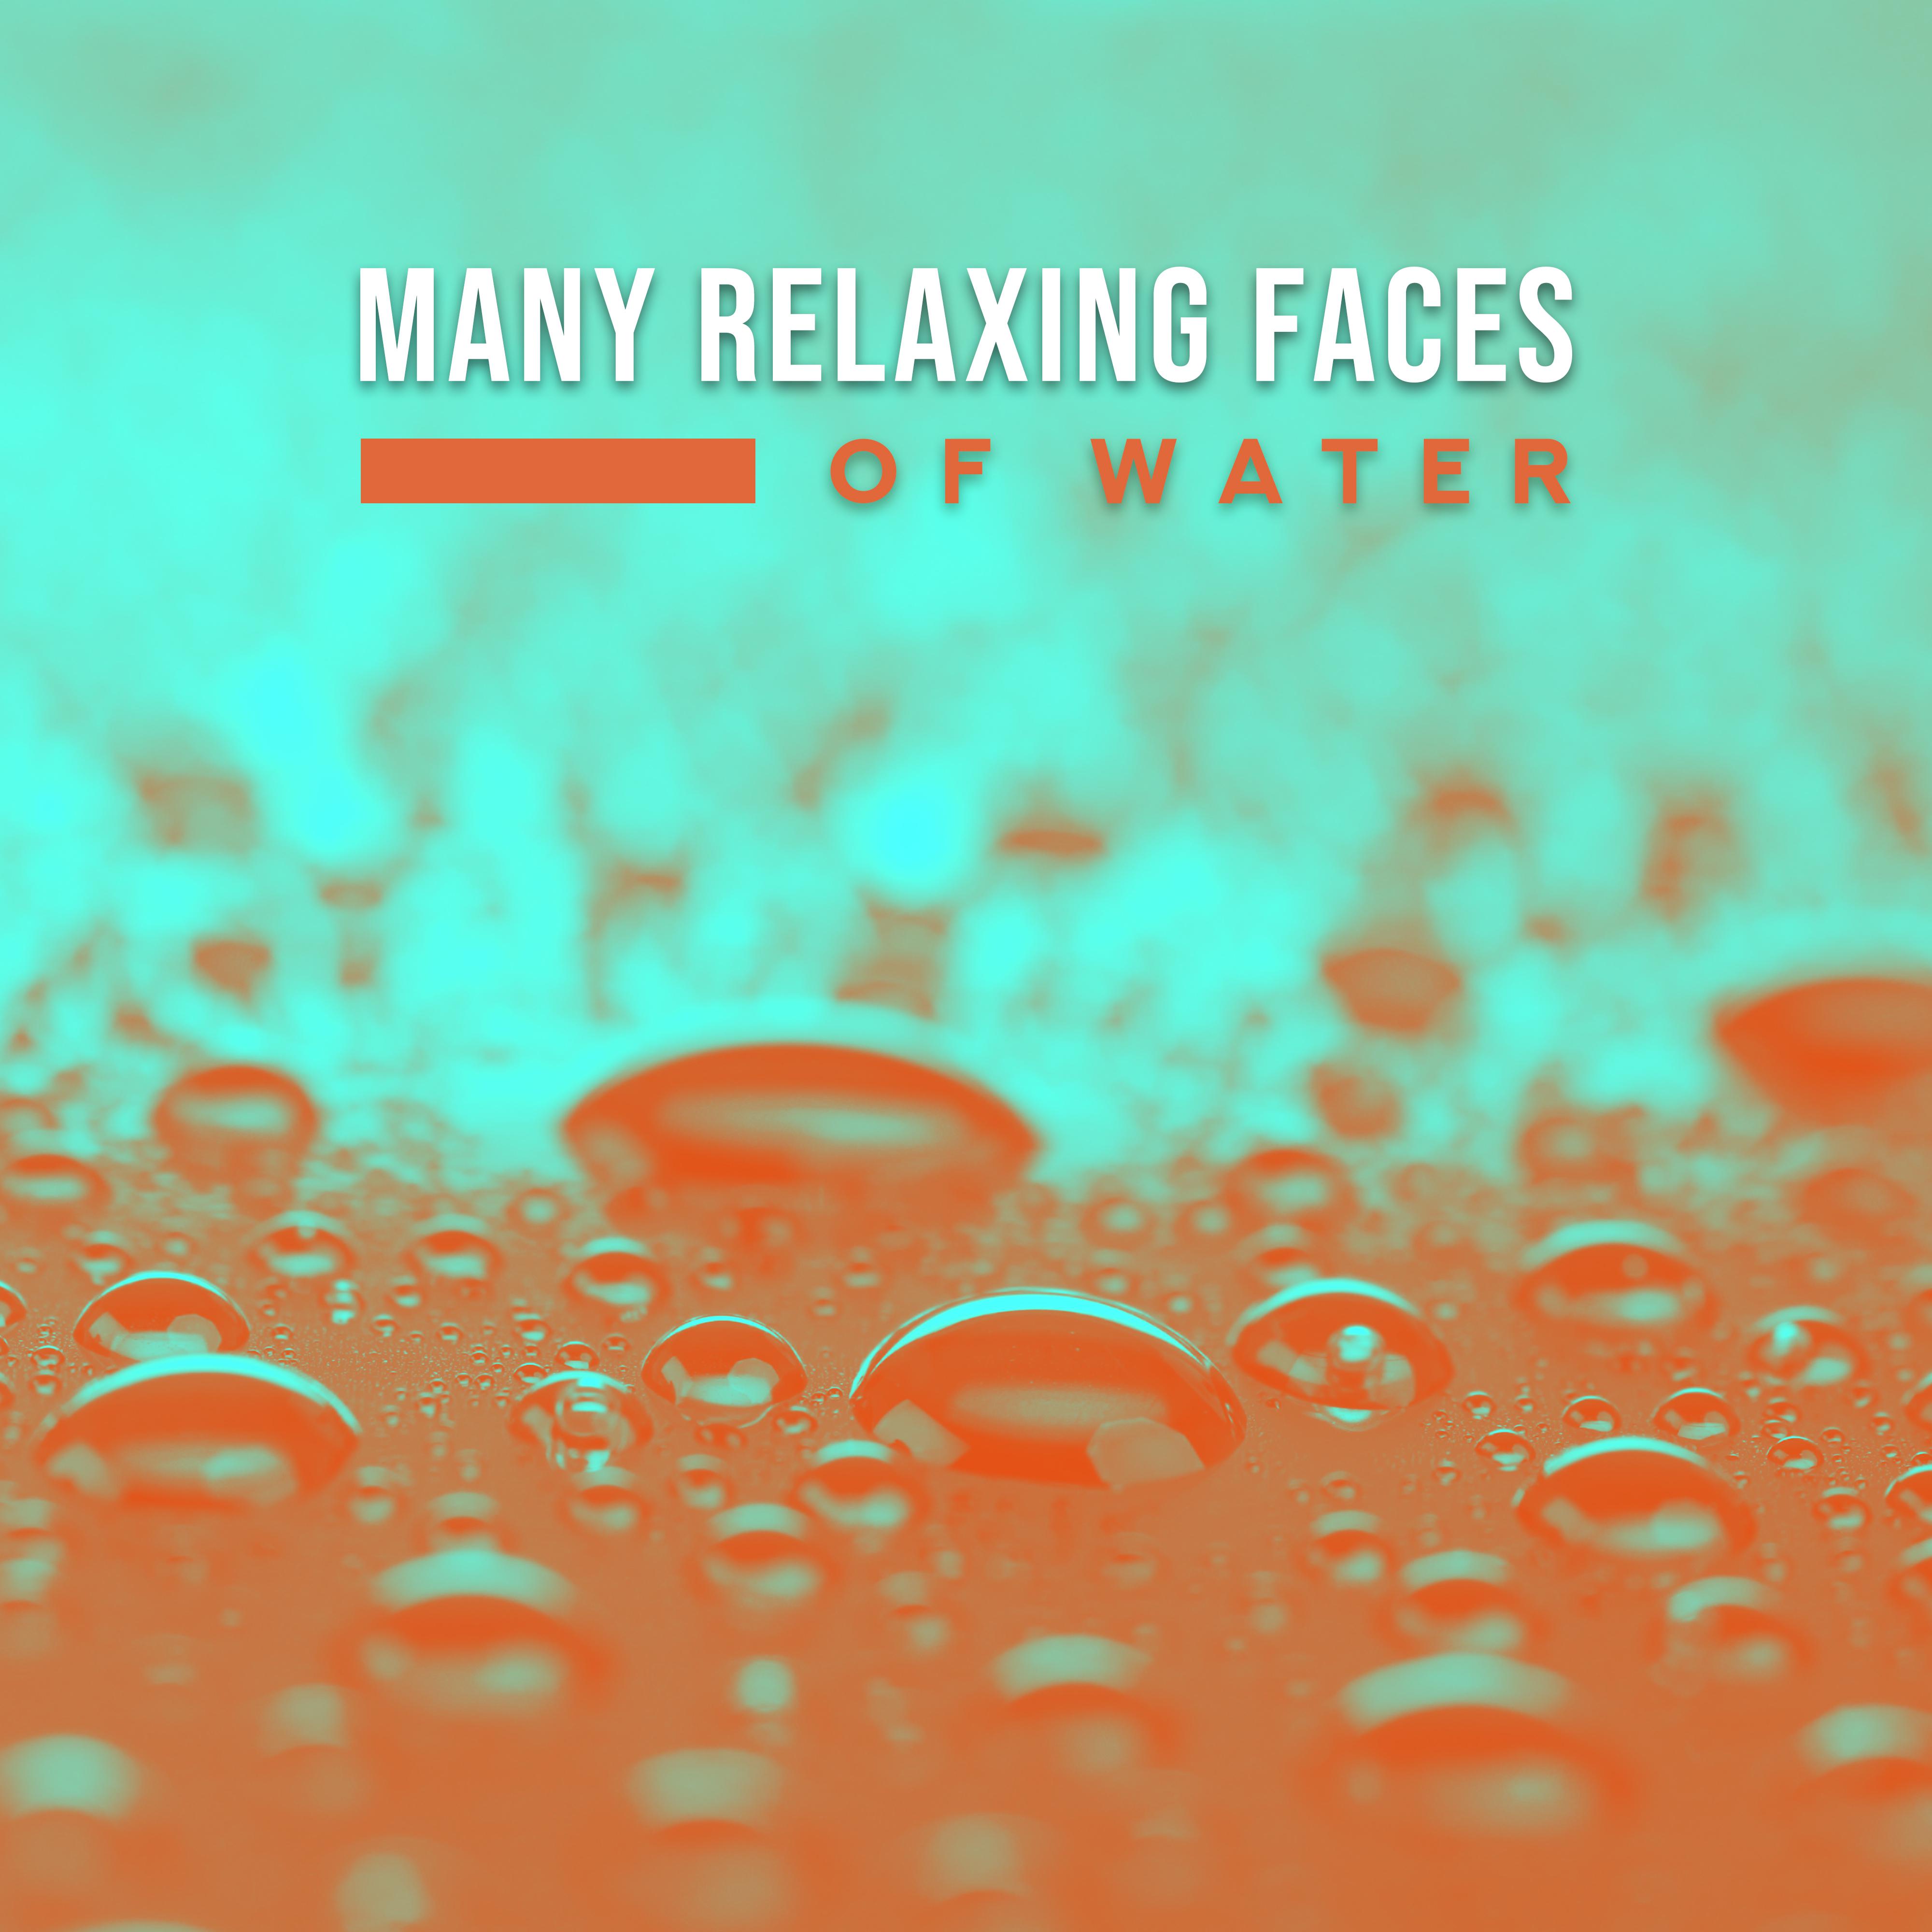 Many Relaxing Faces of Water: 2019 New Age Ambient & Nature Music for Total Relaxation, Calming Down, Rest, Restore Vital Energy